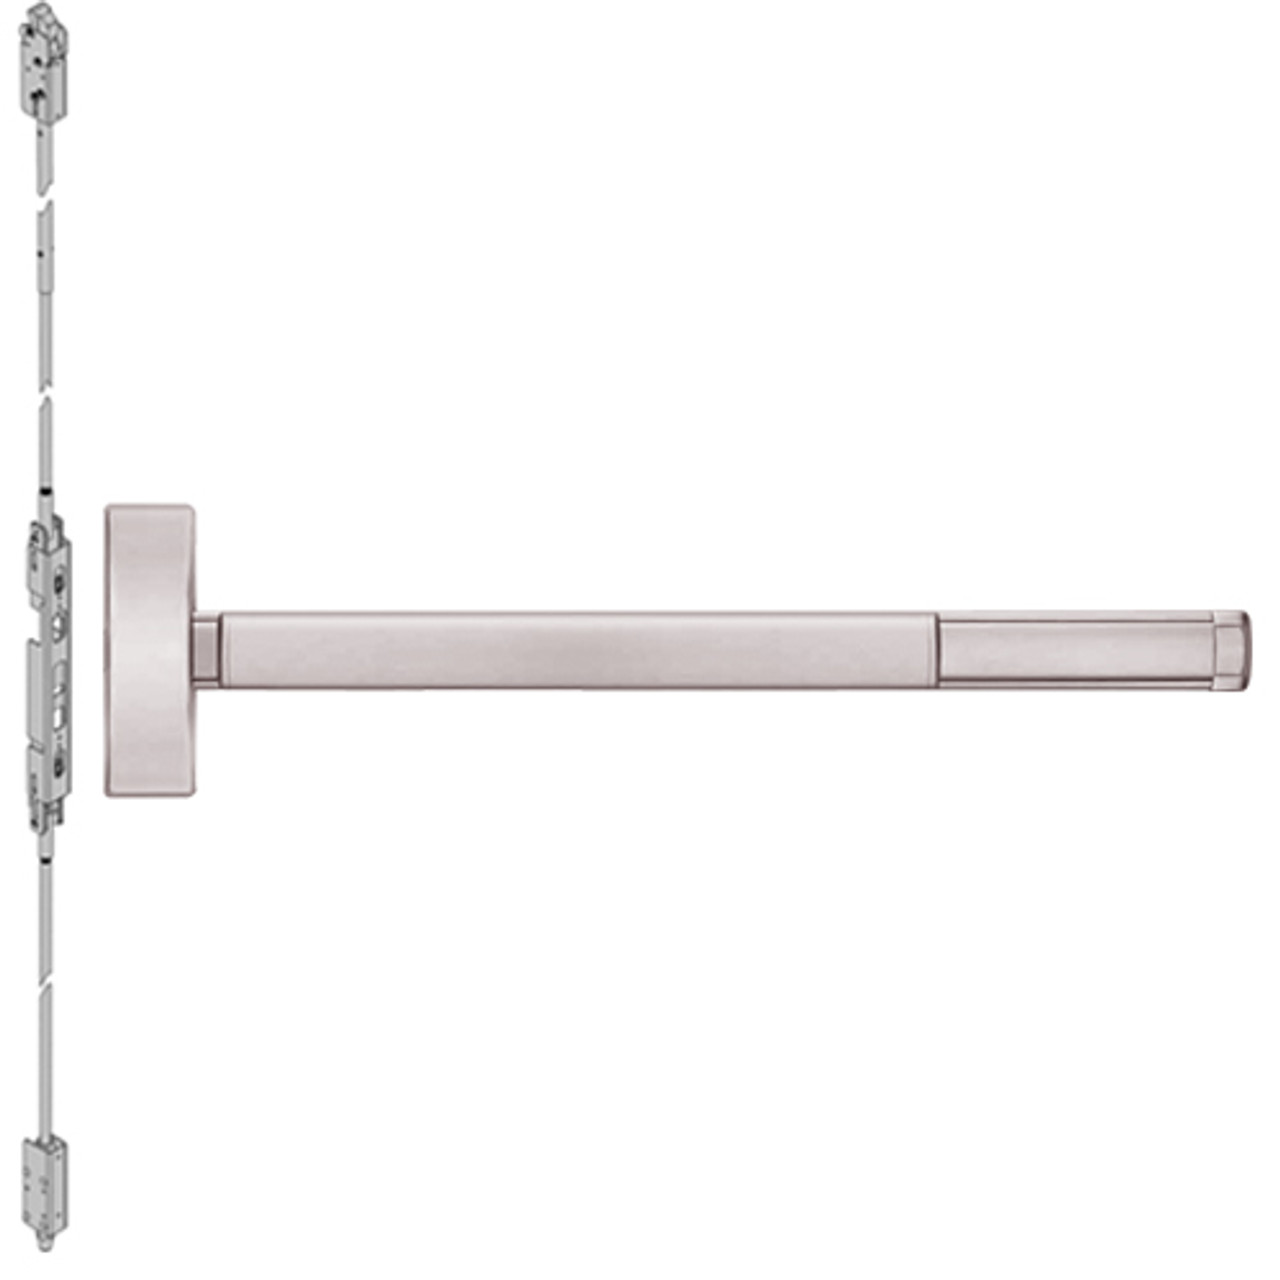 TS2805LBR-628-36 PHI 2800 Series Concealed Vertical Rod Exit Device with Touchbar Monitoring Switch Prepped for Key Controls Thumb Piece in Satin Aluminum Finish